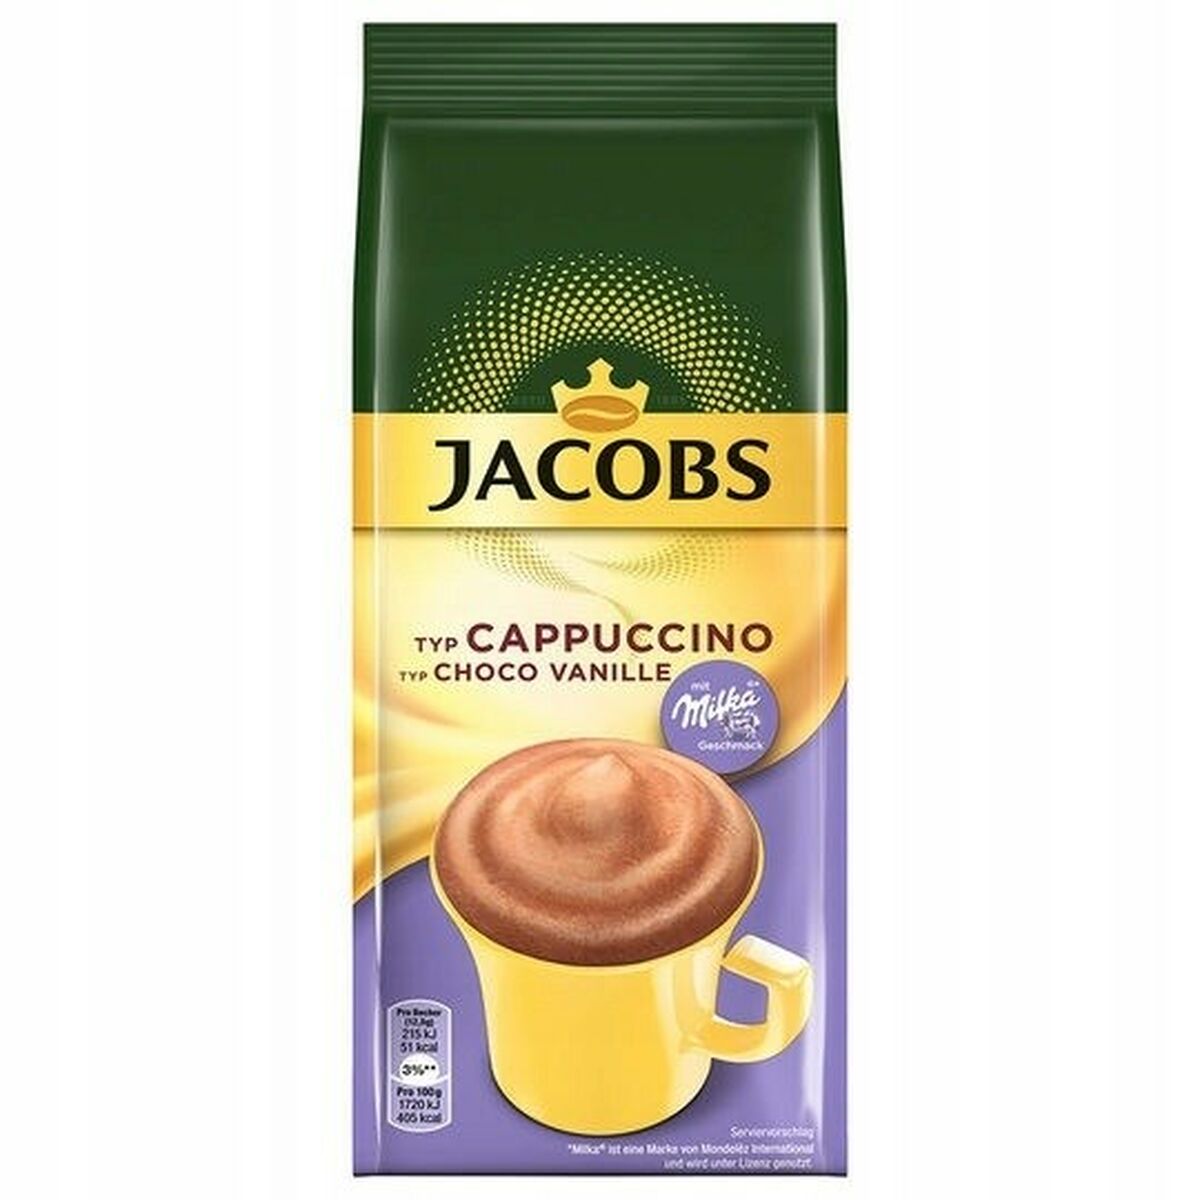 Soluble coffee Jacobs Capuccino Vanilla 500 g